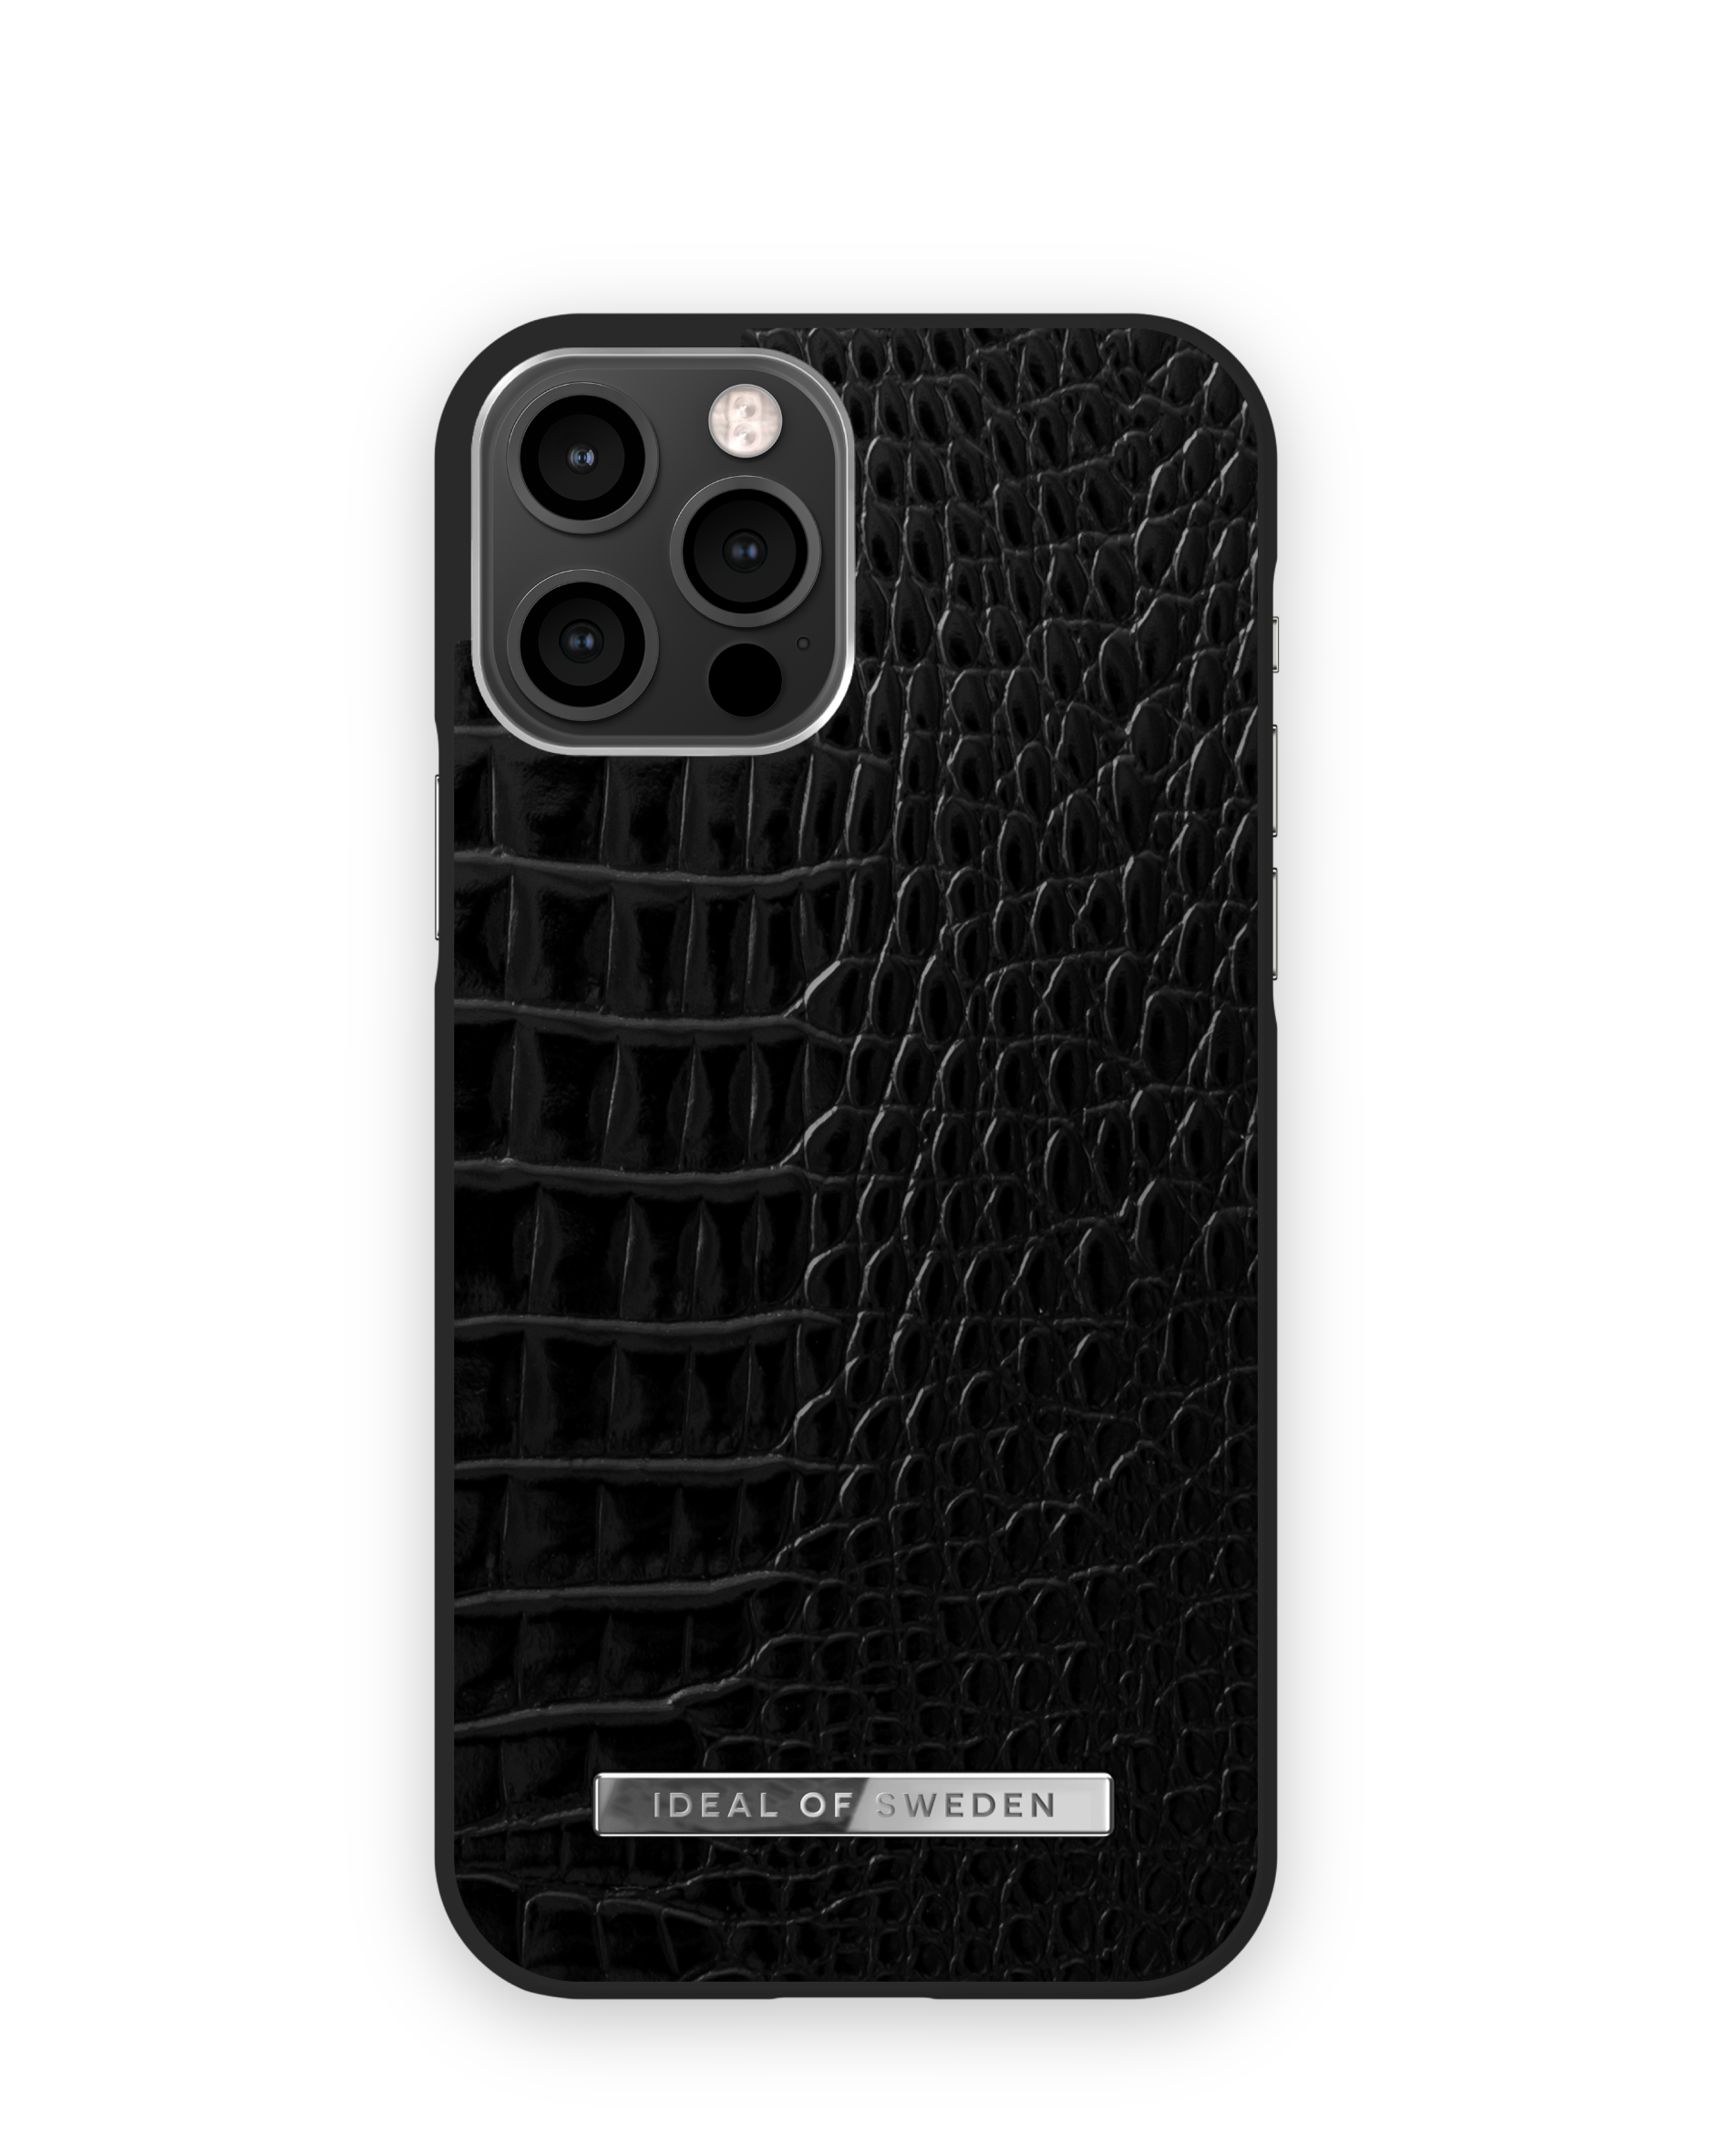 Apple Pro, iPhone Backcover, Silver OF 12 12, iPhone Neo SWEDEN Apple Croco IDACSS21-I2061-306, IDEAL Noir Apple,